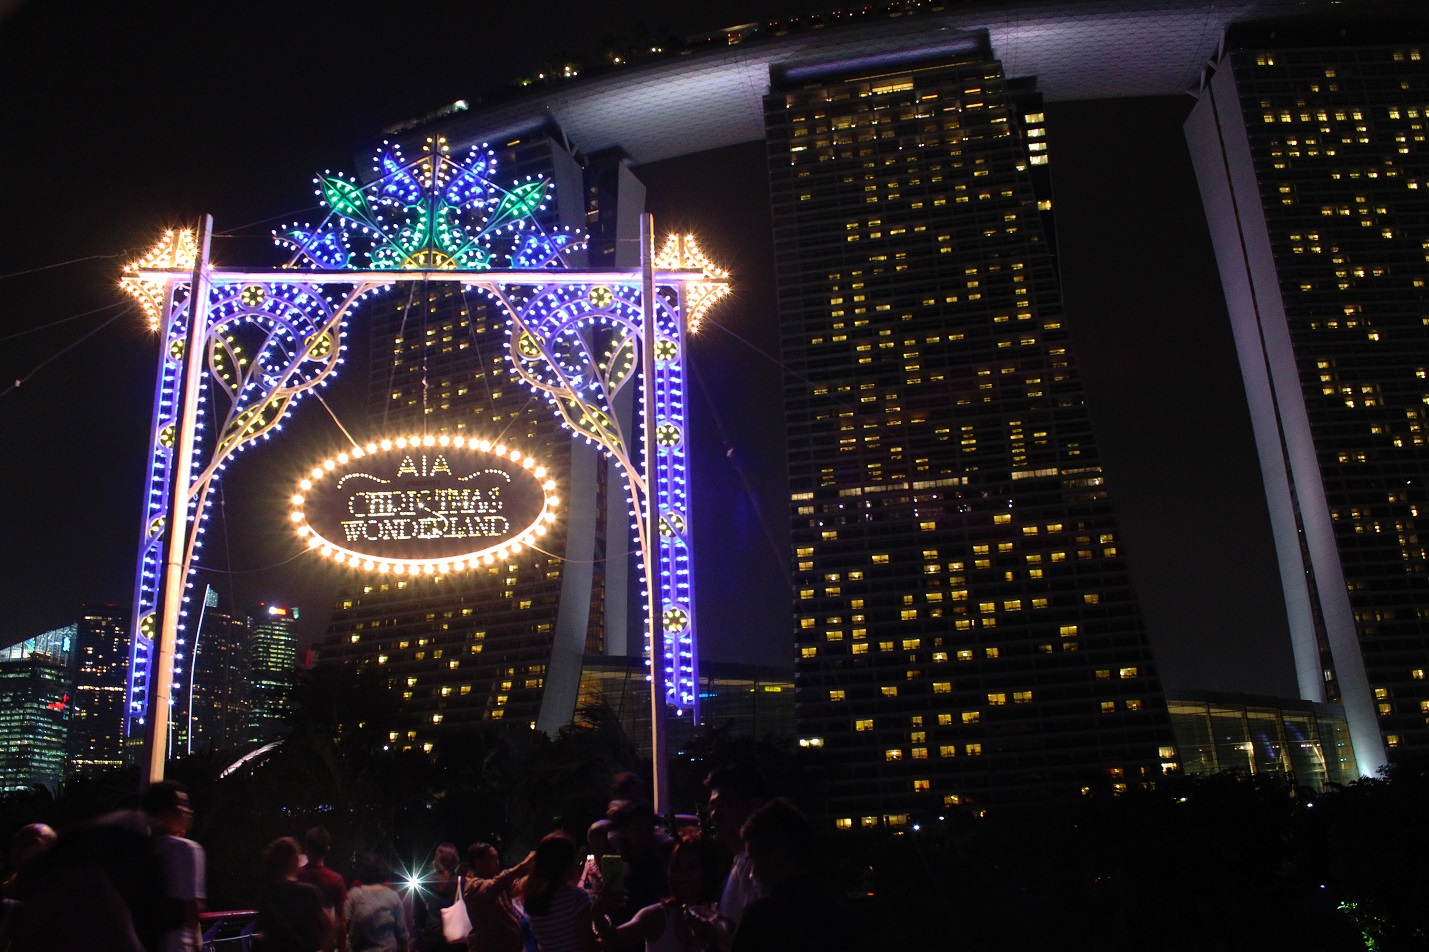 RETURNING WONDER: Back for its second year, Christmas Wonderland at Gardens the Bay has almost doubled in size, with the entire area spanning 35,000 square metres. The event is open daily from 27 November 2015 to 3 January 2016 from 4PM to 12AM. Photo: Pearlyn Cheu